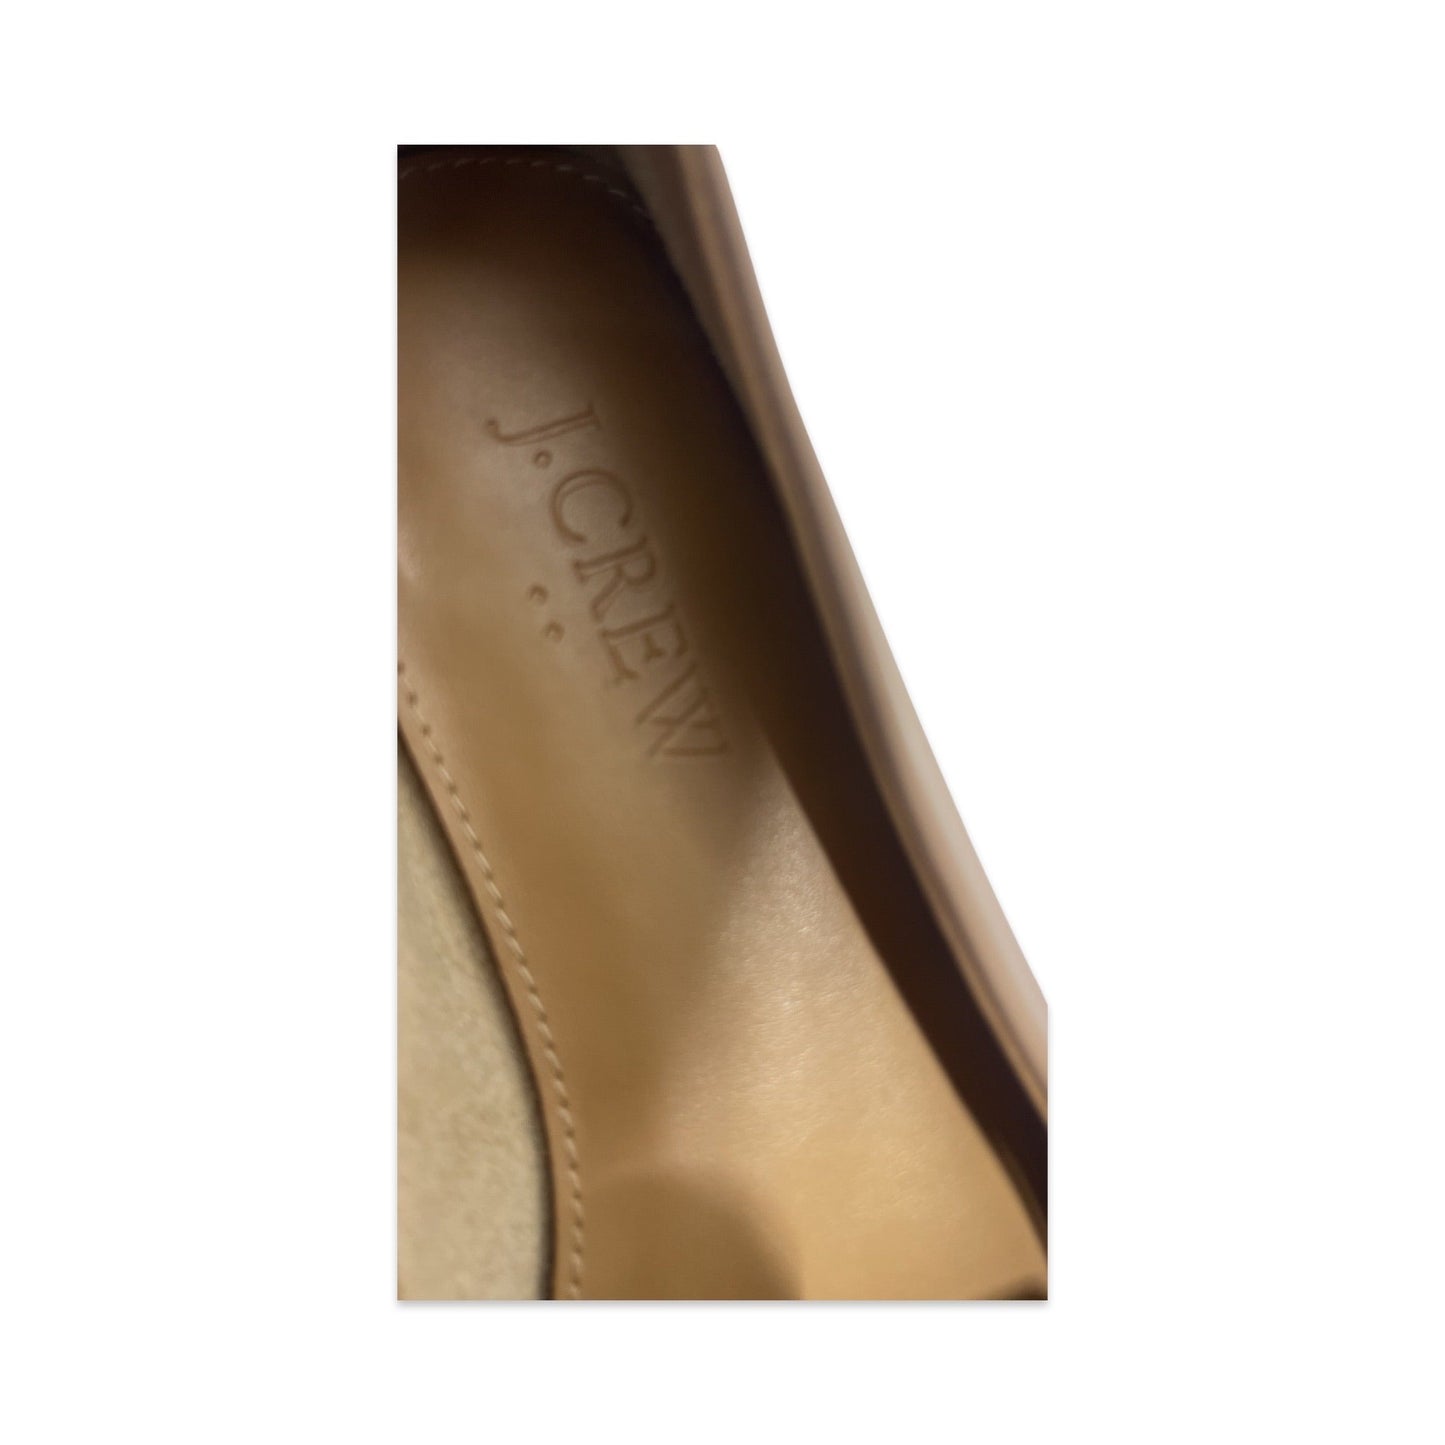 Shoes Flats Ballet By J Crew  Size: 5